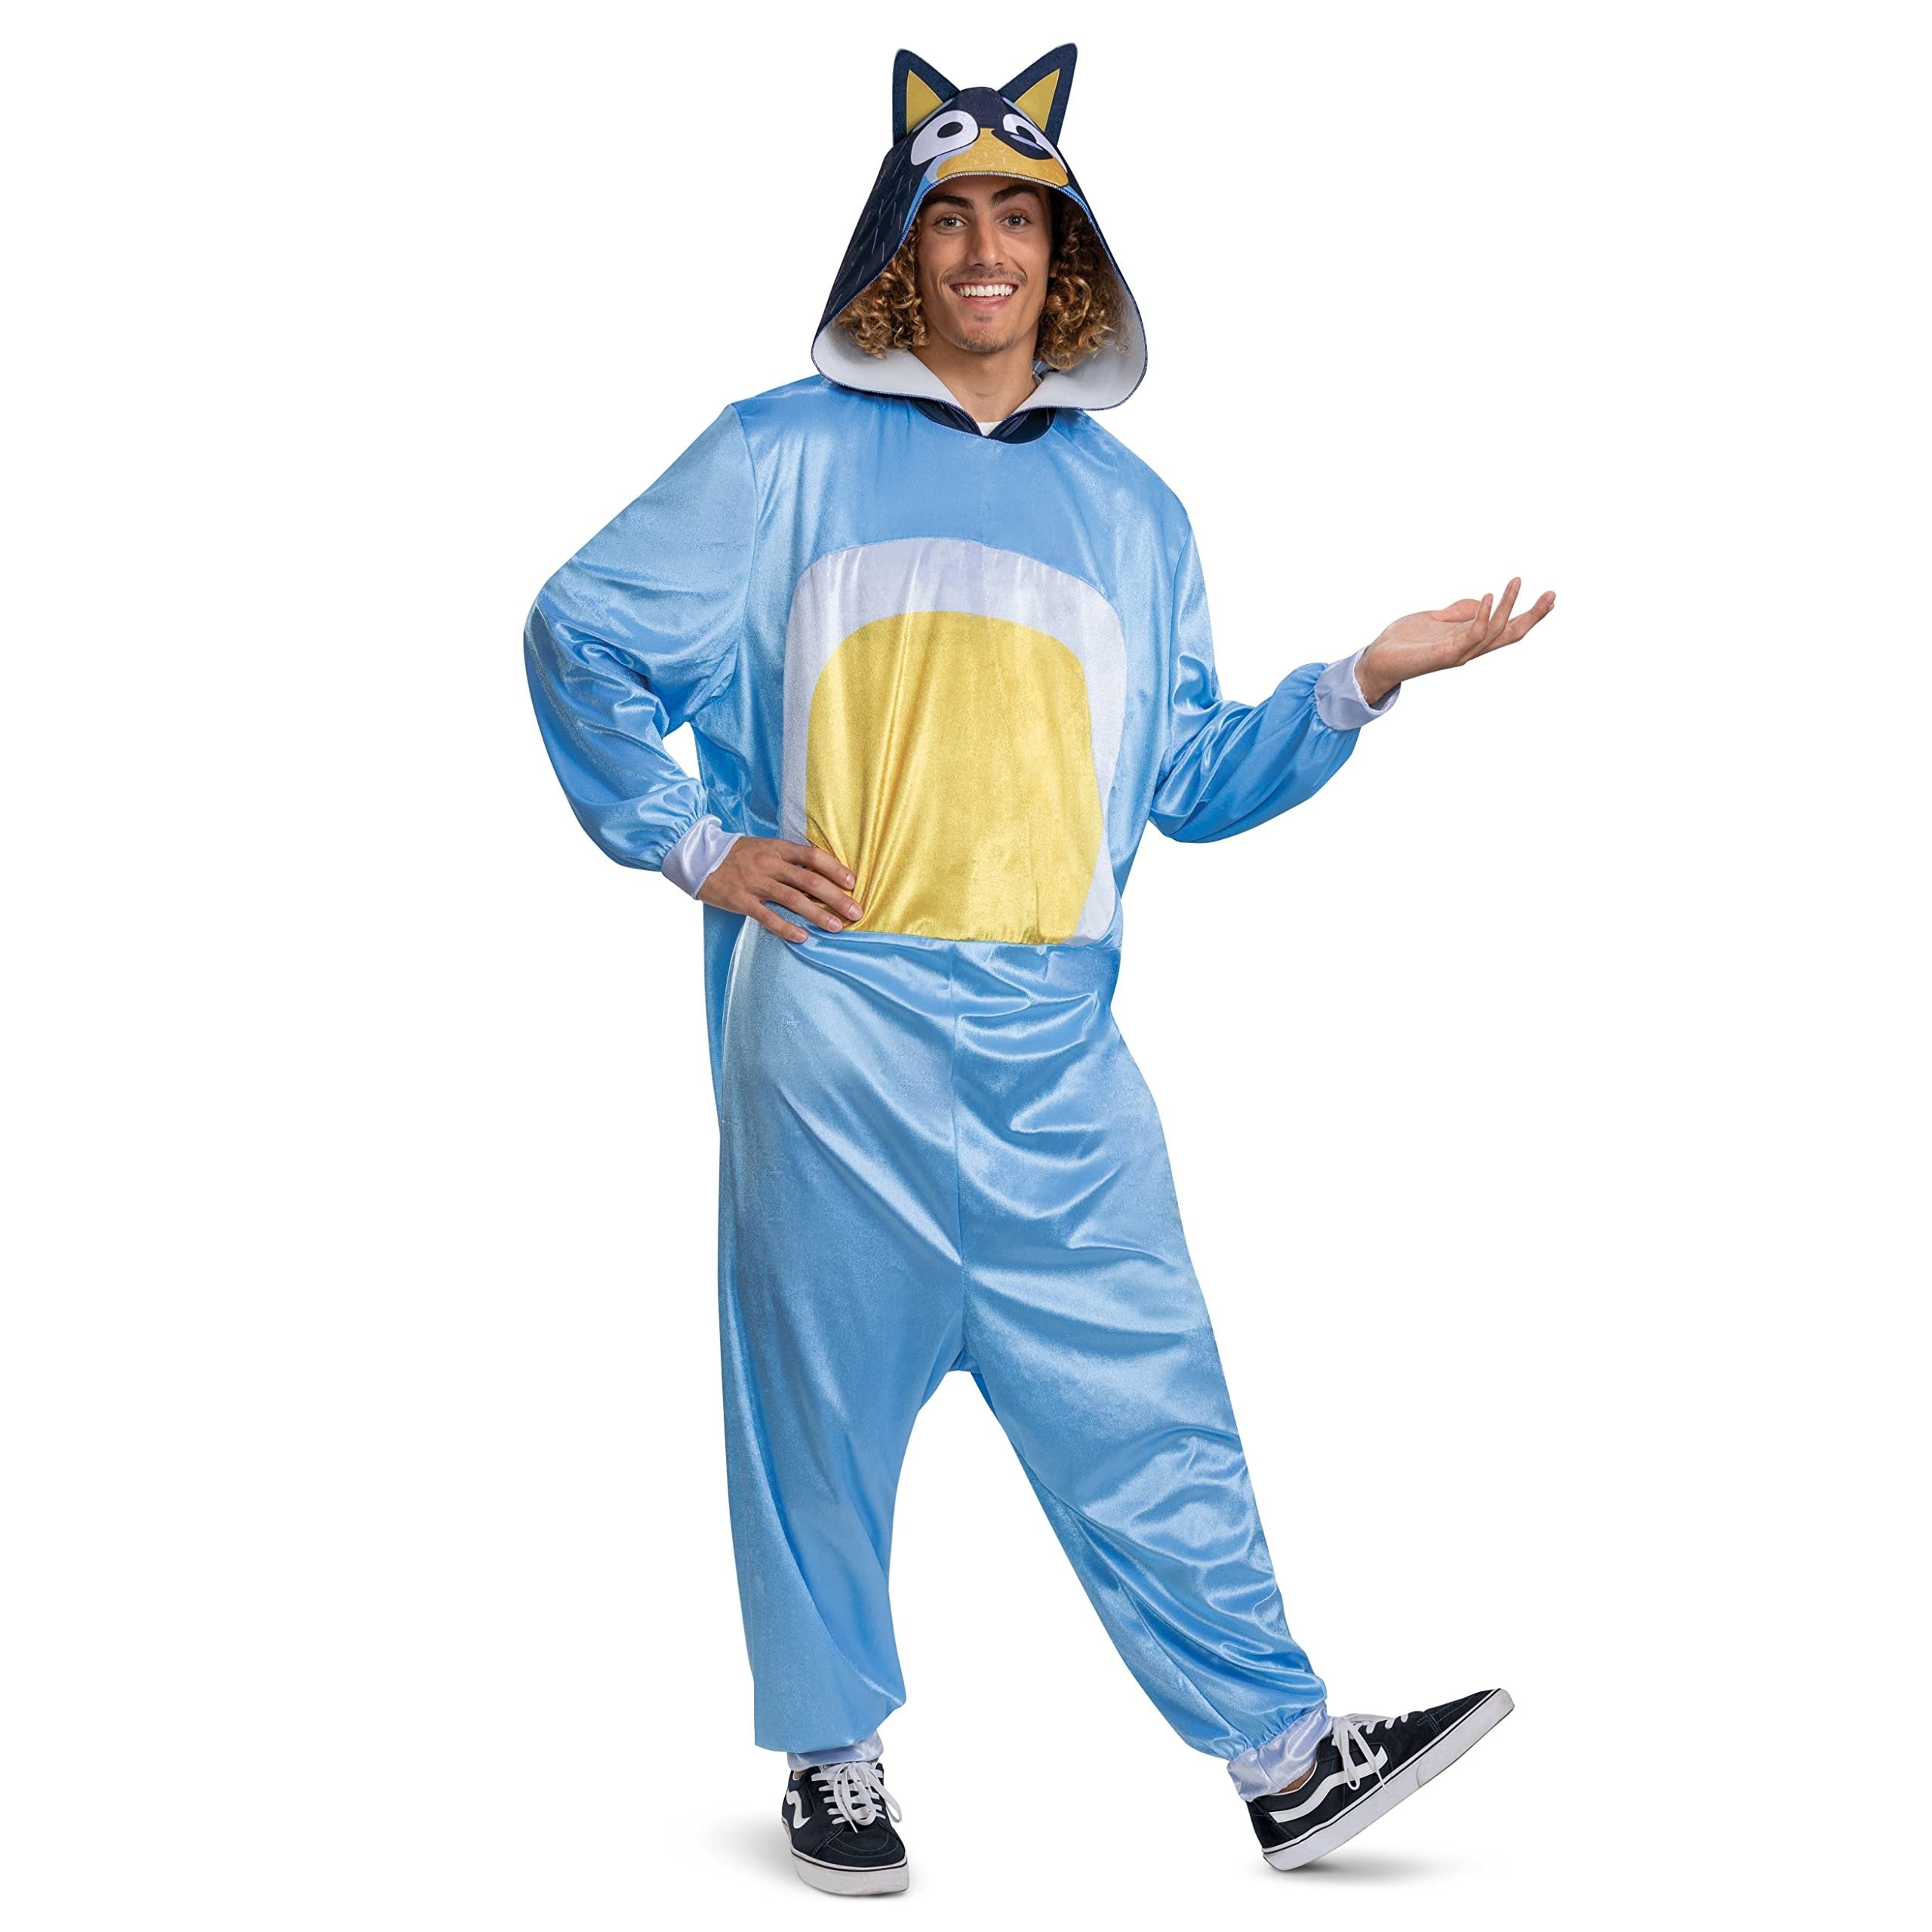 Disguise Bluey Bandit Costume, Official Bluey Dad Costume and Headpiece, One Size Large/XL (42-46)